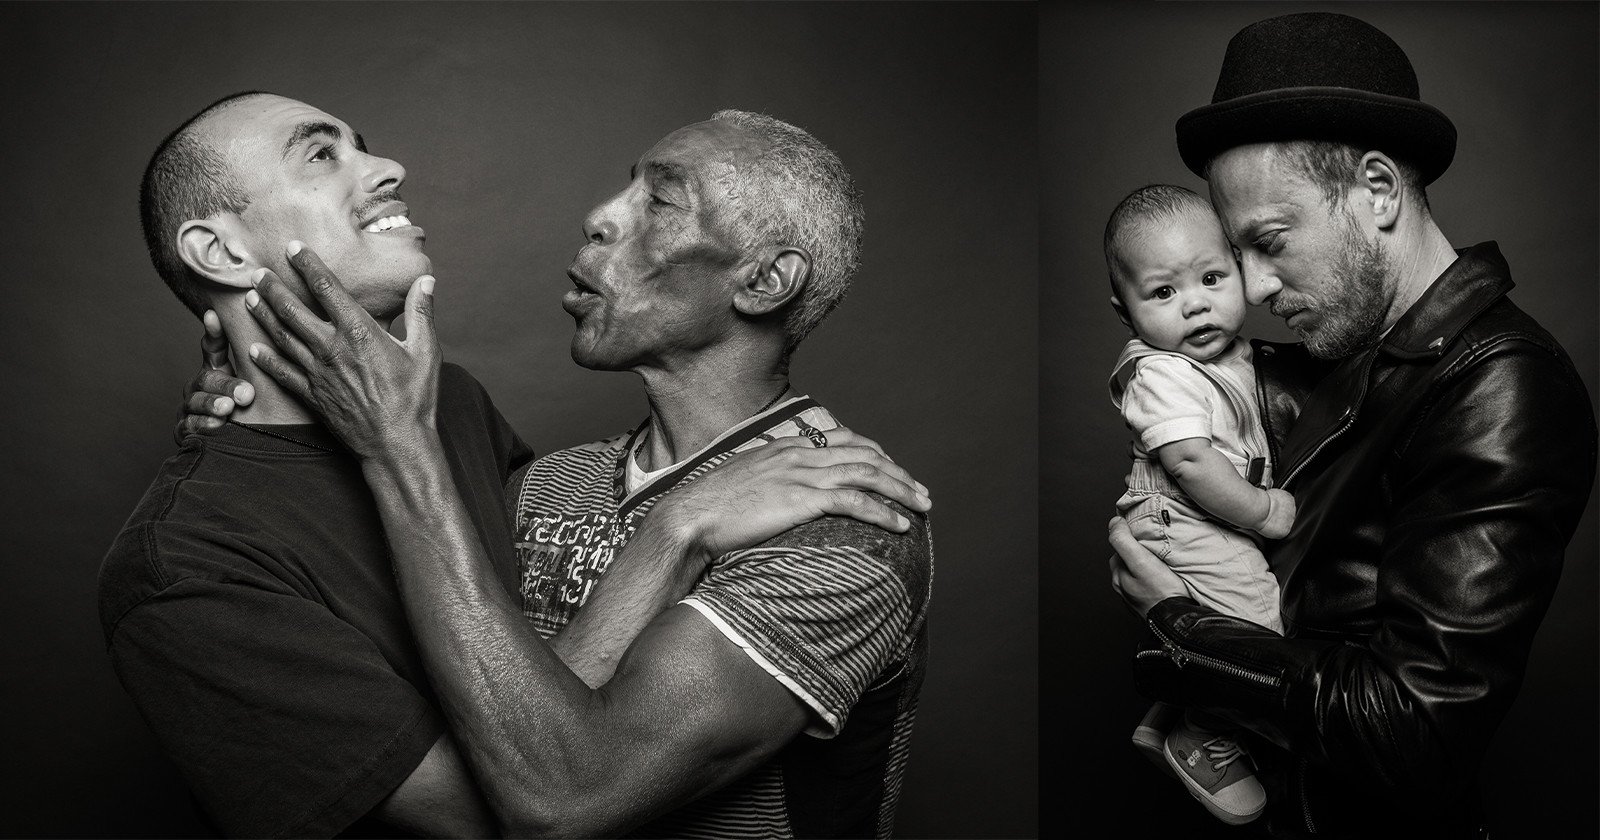 Emotional Portrait Project Explores the Meaning of Fatherhood